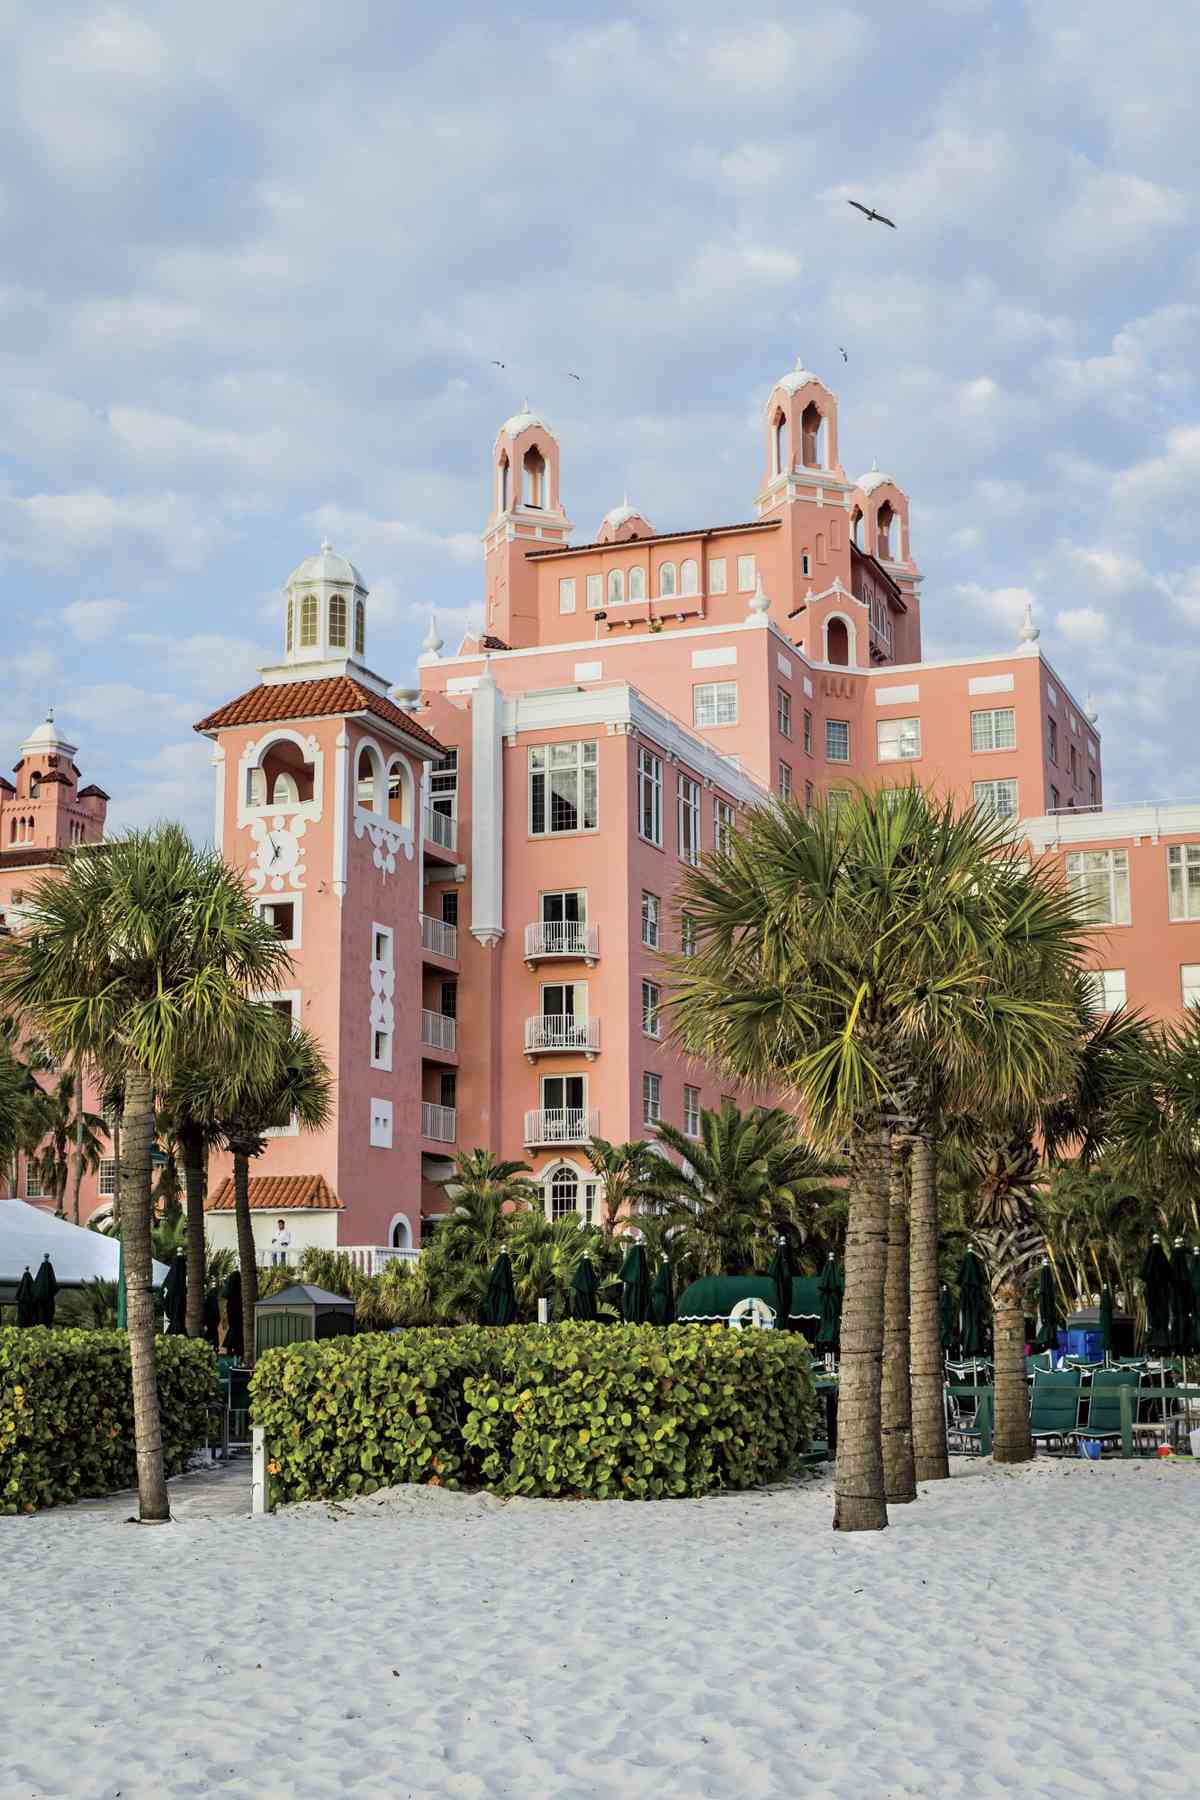 The Don Cesar Hotel in St. Petersburg, FL